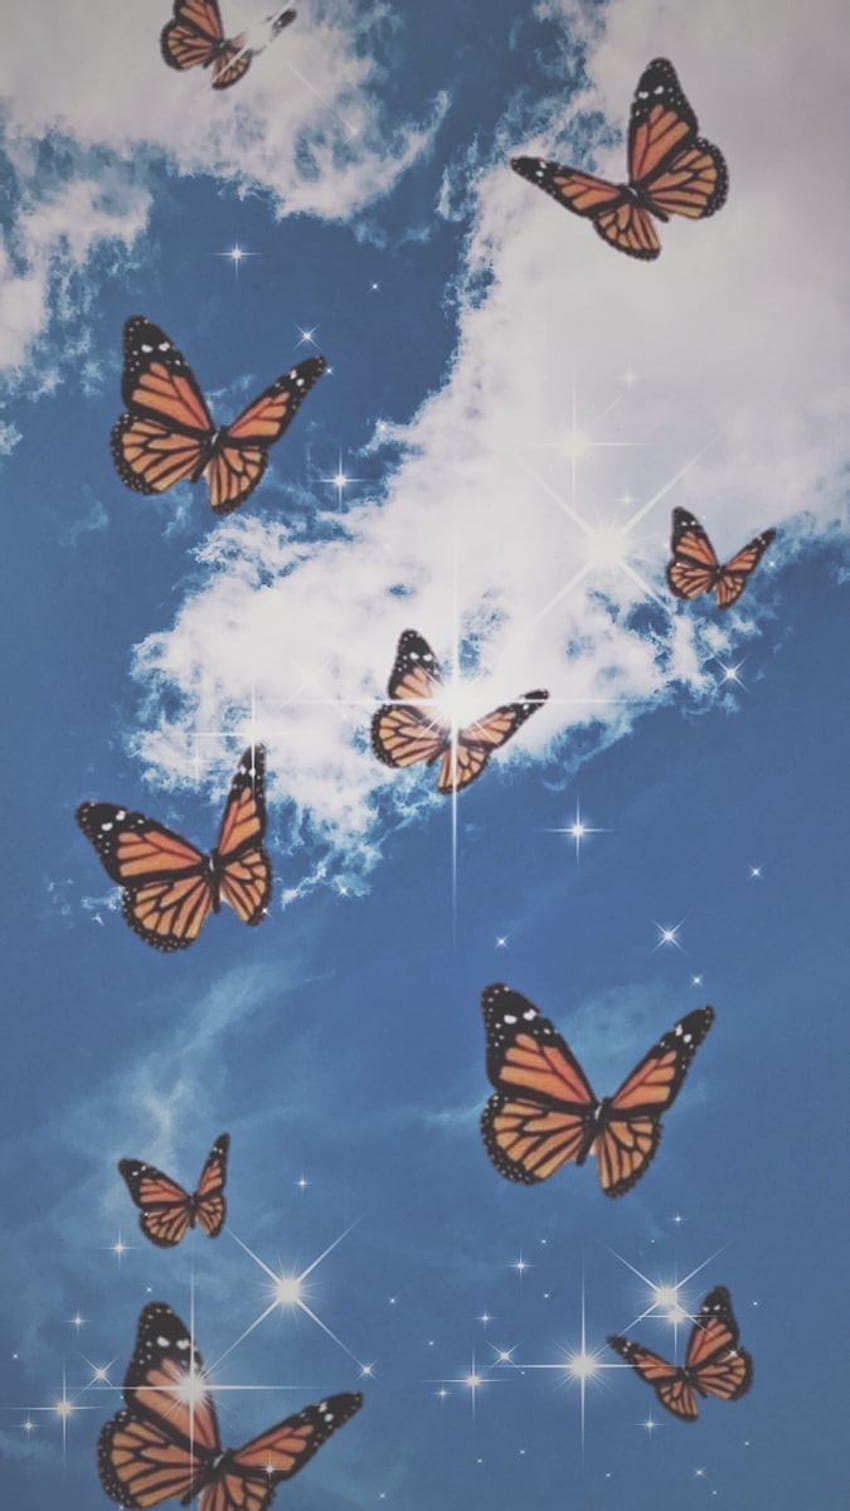 Aesthetic Butterfly Wallpaper Gifts  Merchandise for Sale  Redbubble